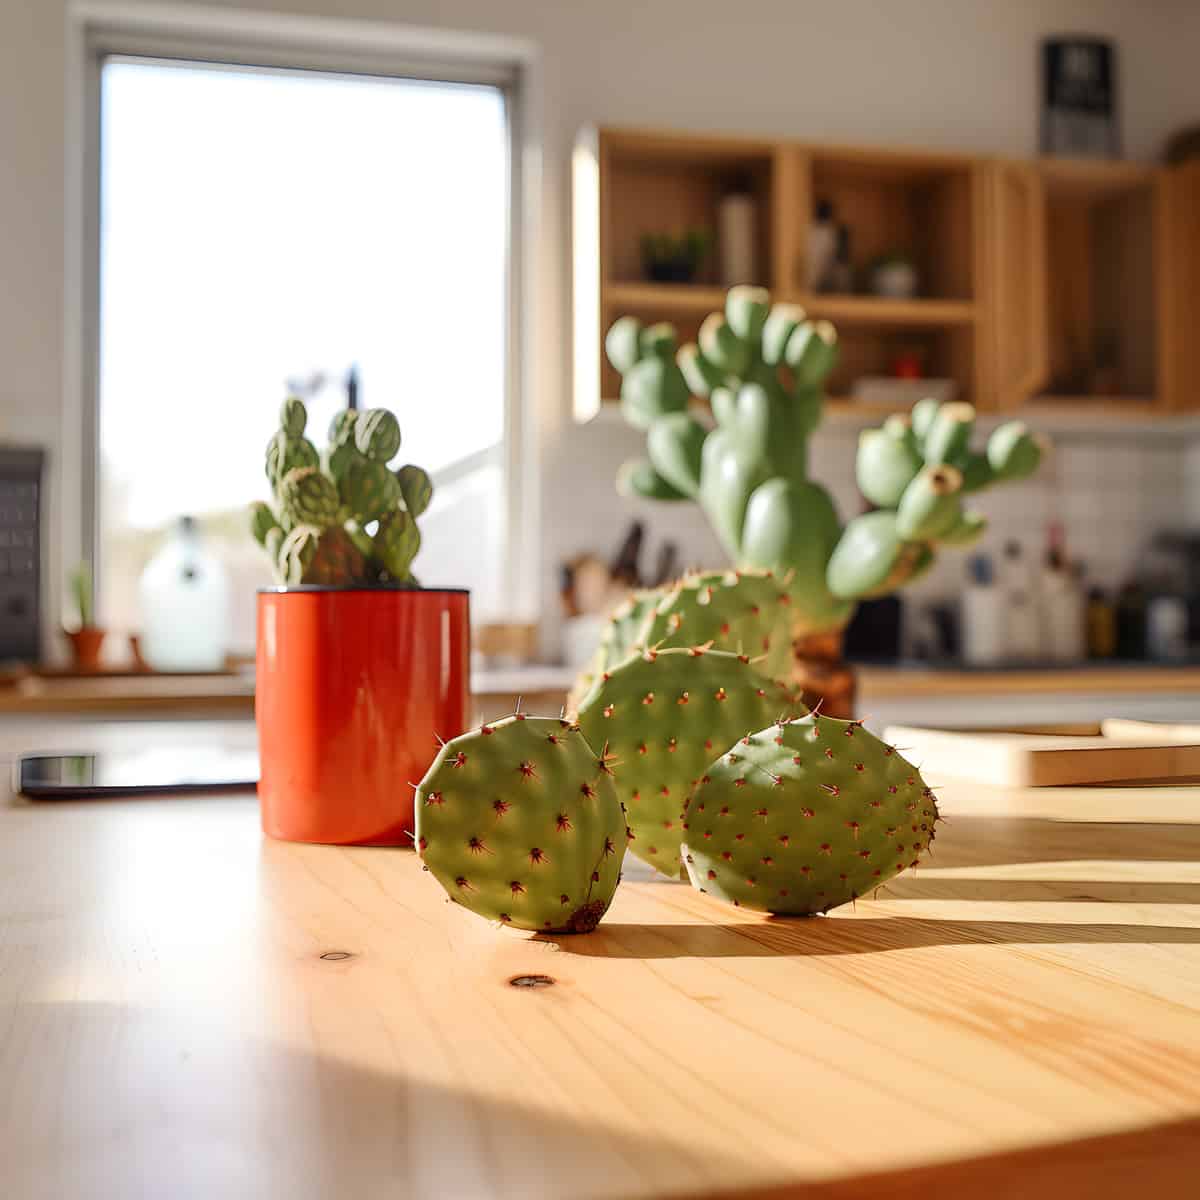 Nopal on a kitchen counter